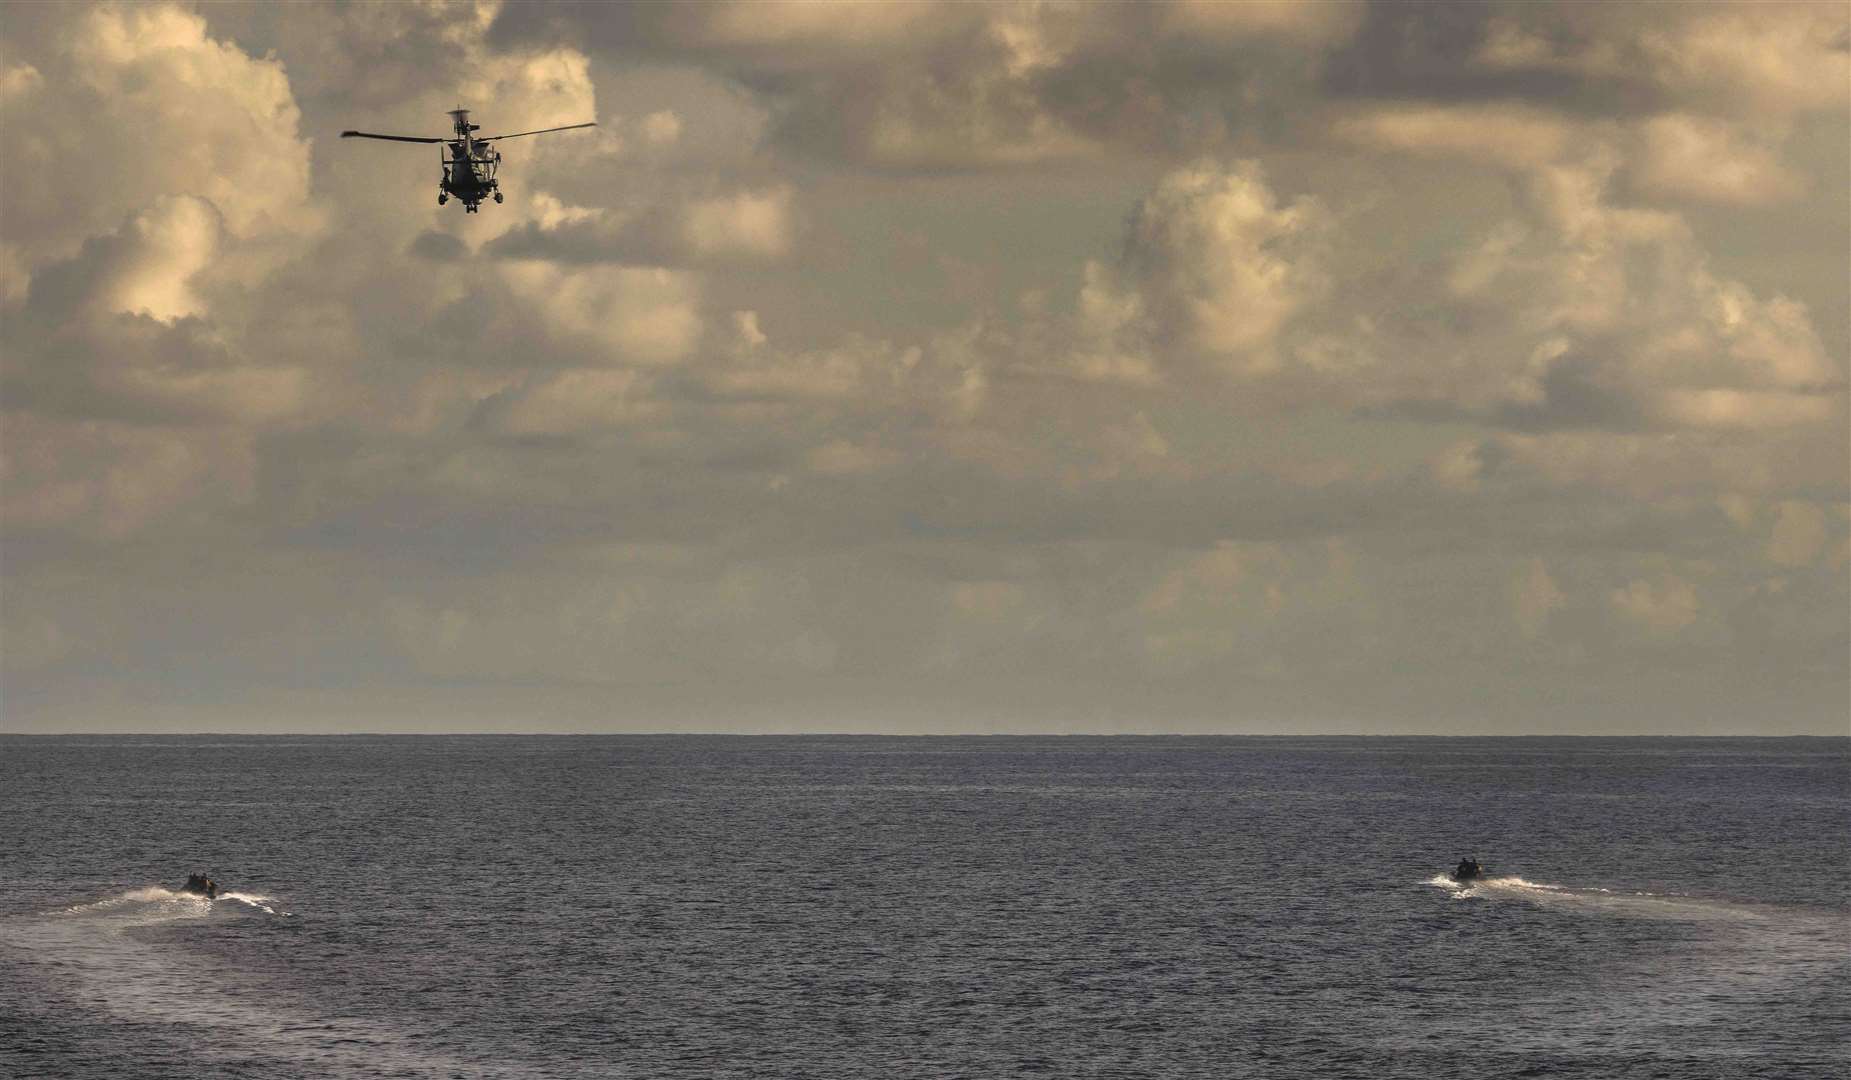 HMS Dauntless’ embarked Wildcat helicopter launches with two sea boats to intercept and apprehend a suspect vessel (LPhot Dan Rosenbaum/MoD/Crown Copyright/PA)